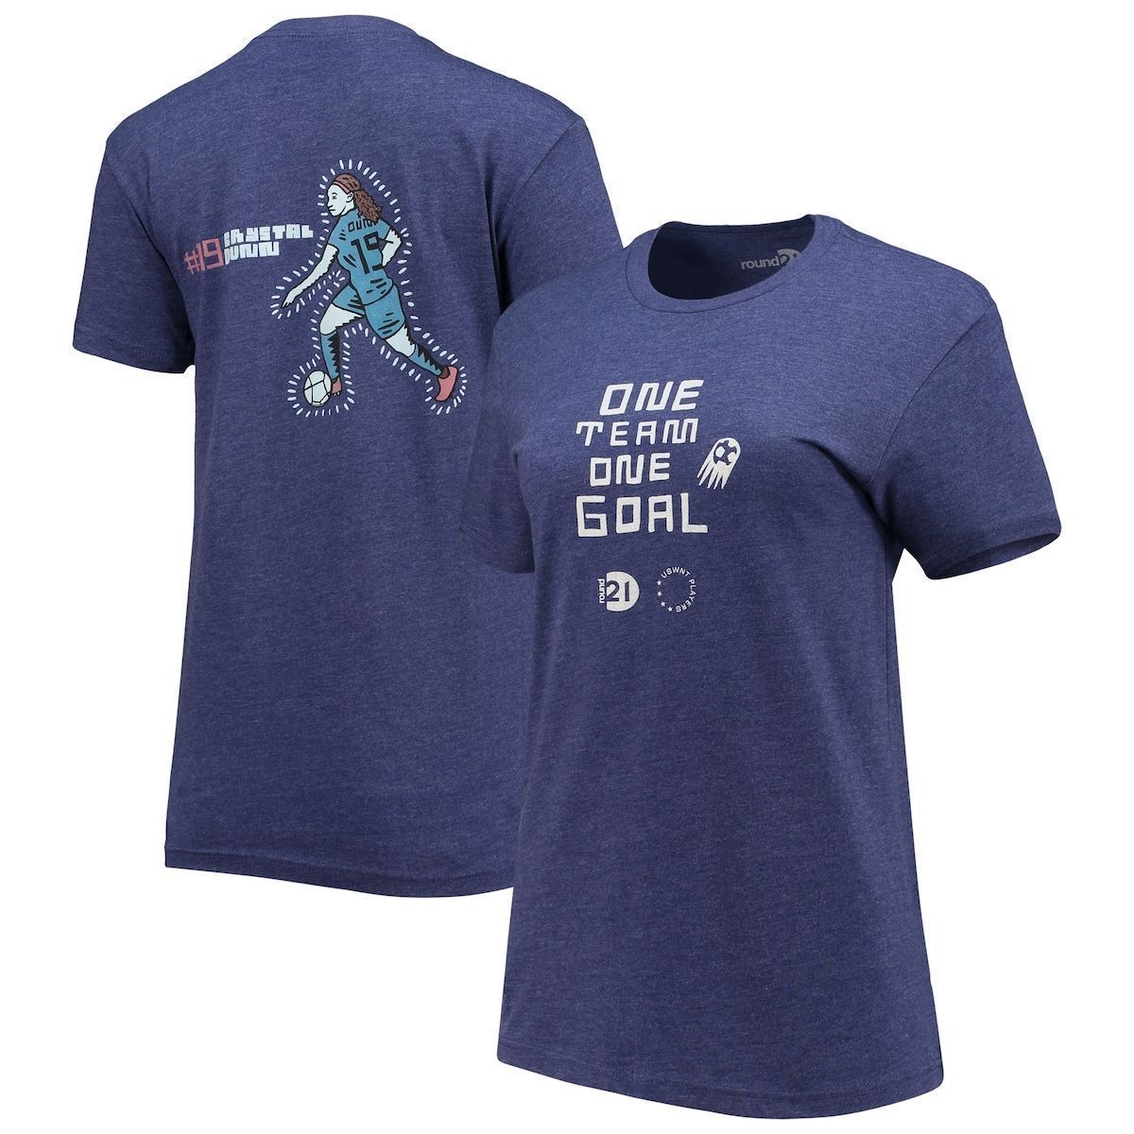 round21 Women's round21 Crystal Dunn Navy USWNT One Team One Goal T-Shirt - Image 2 of 4